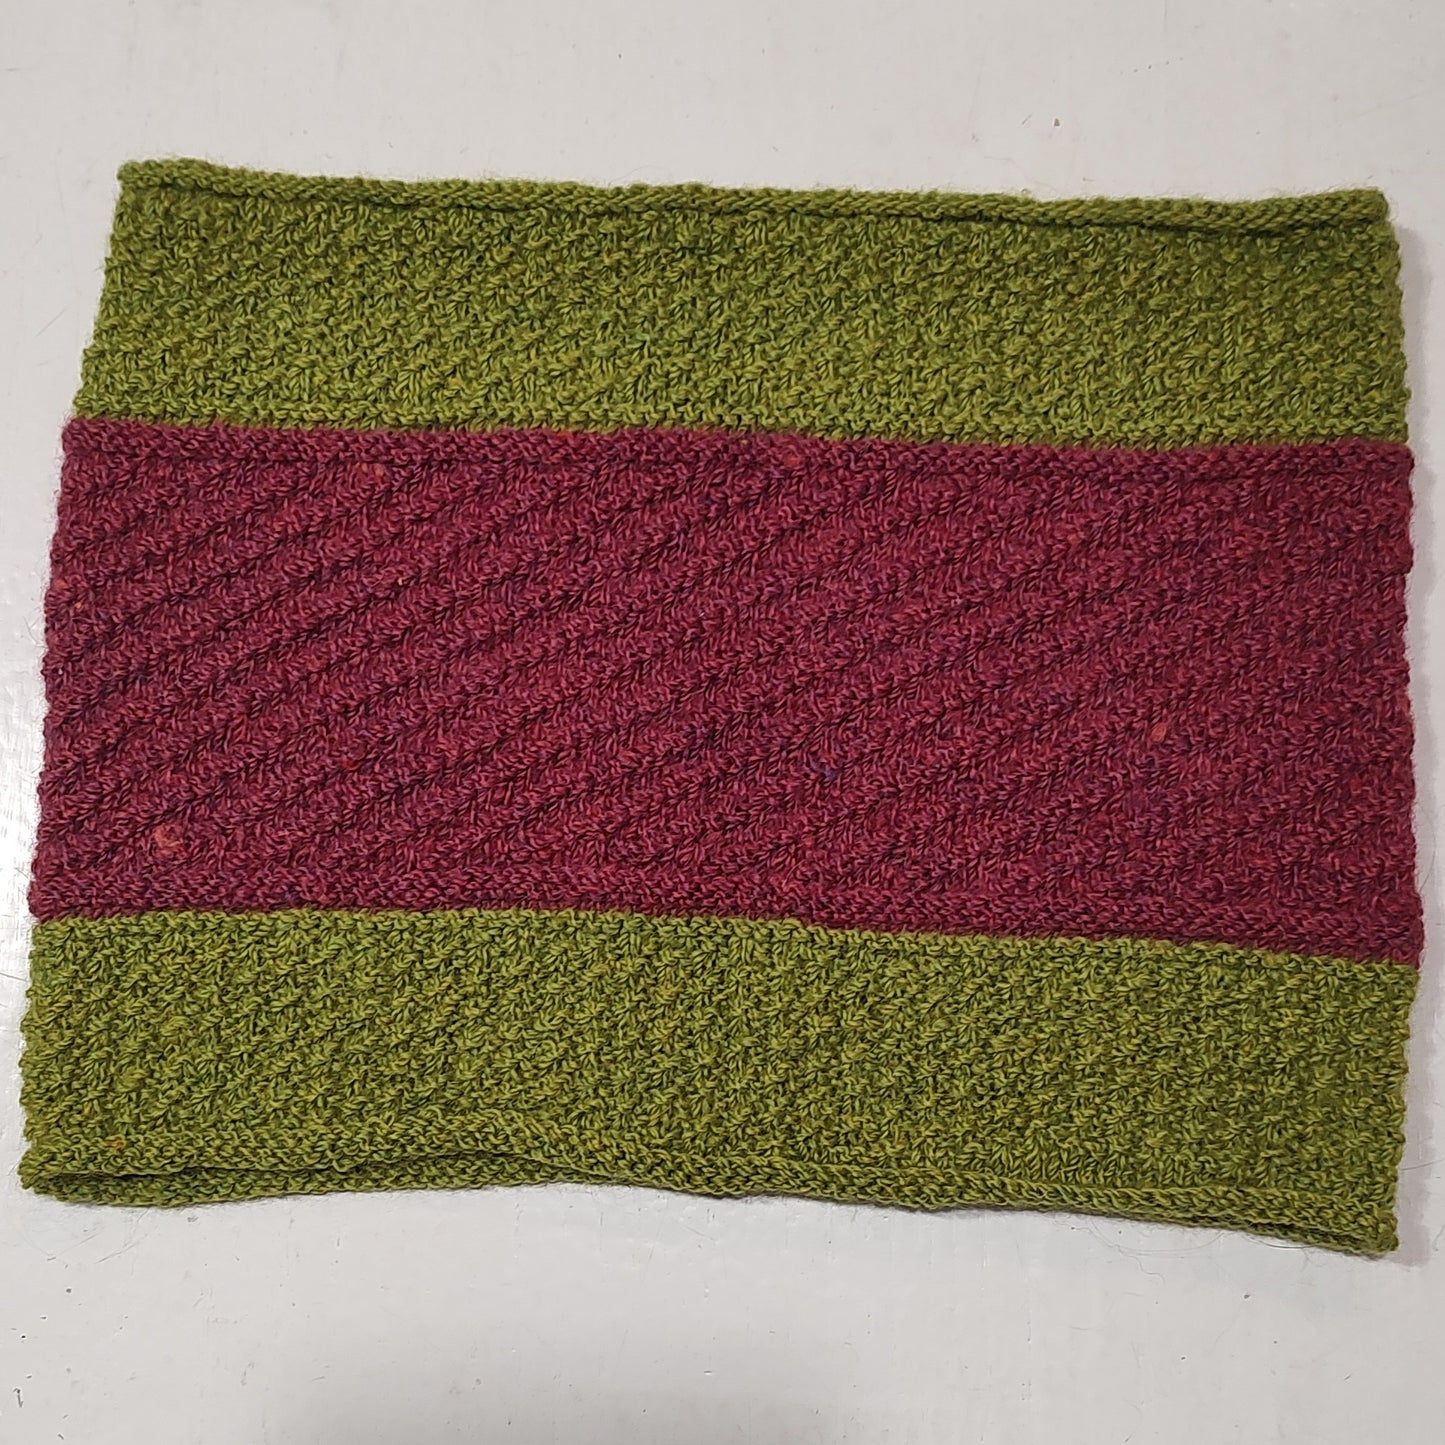 Knitted Cowl - colour blocks and texture